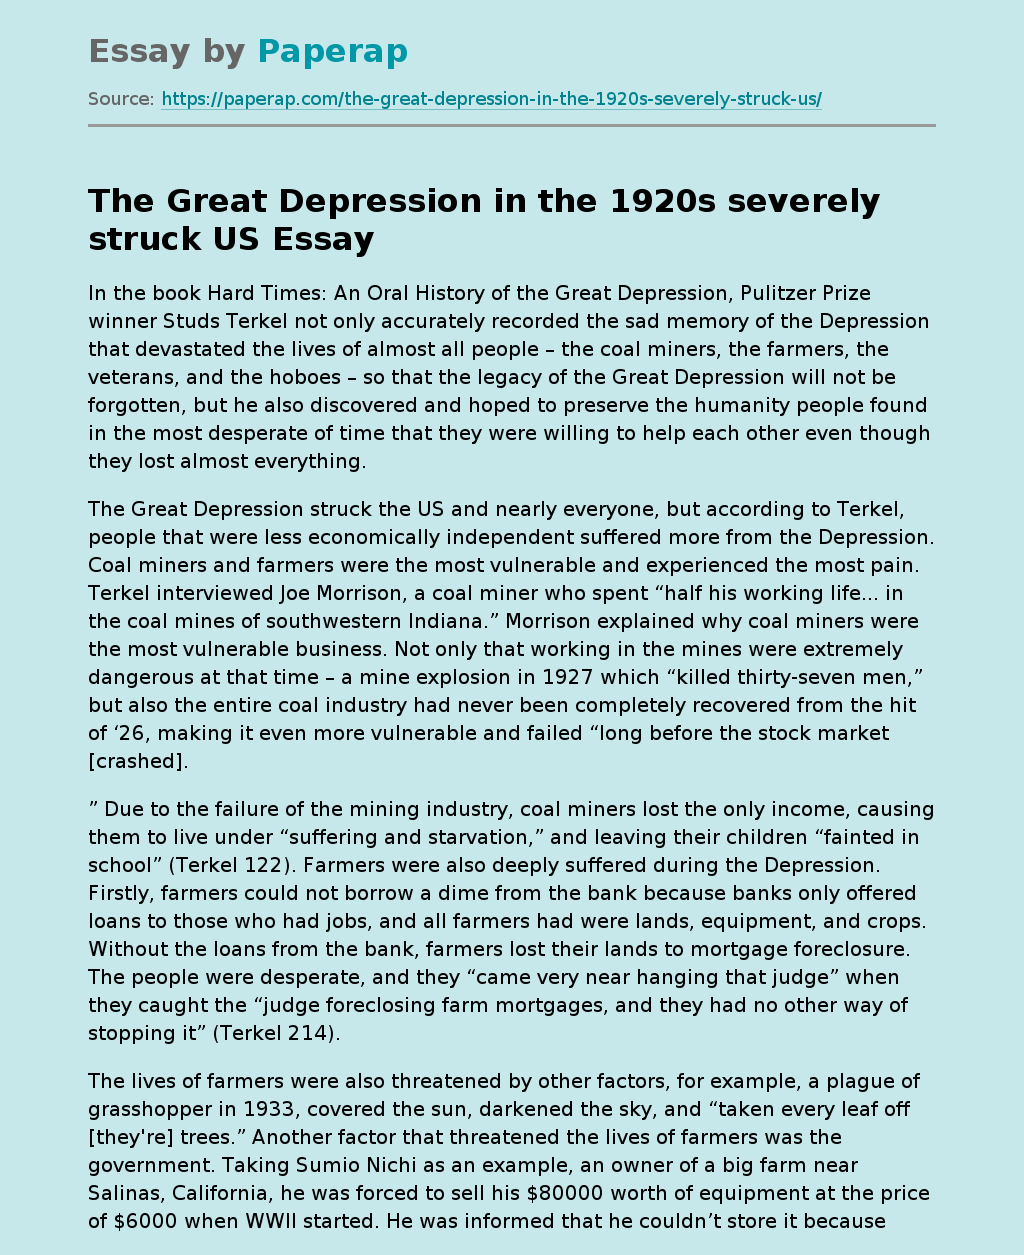 The Great Depression in the 1920s severely struck US